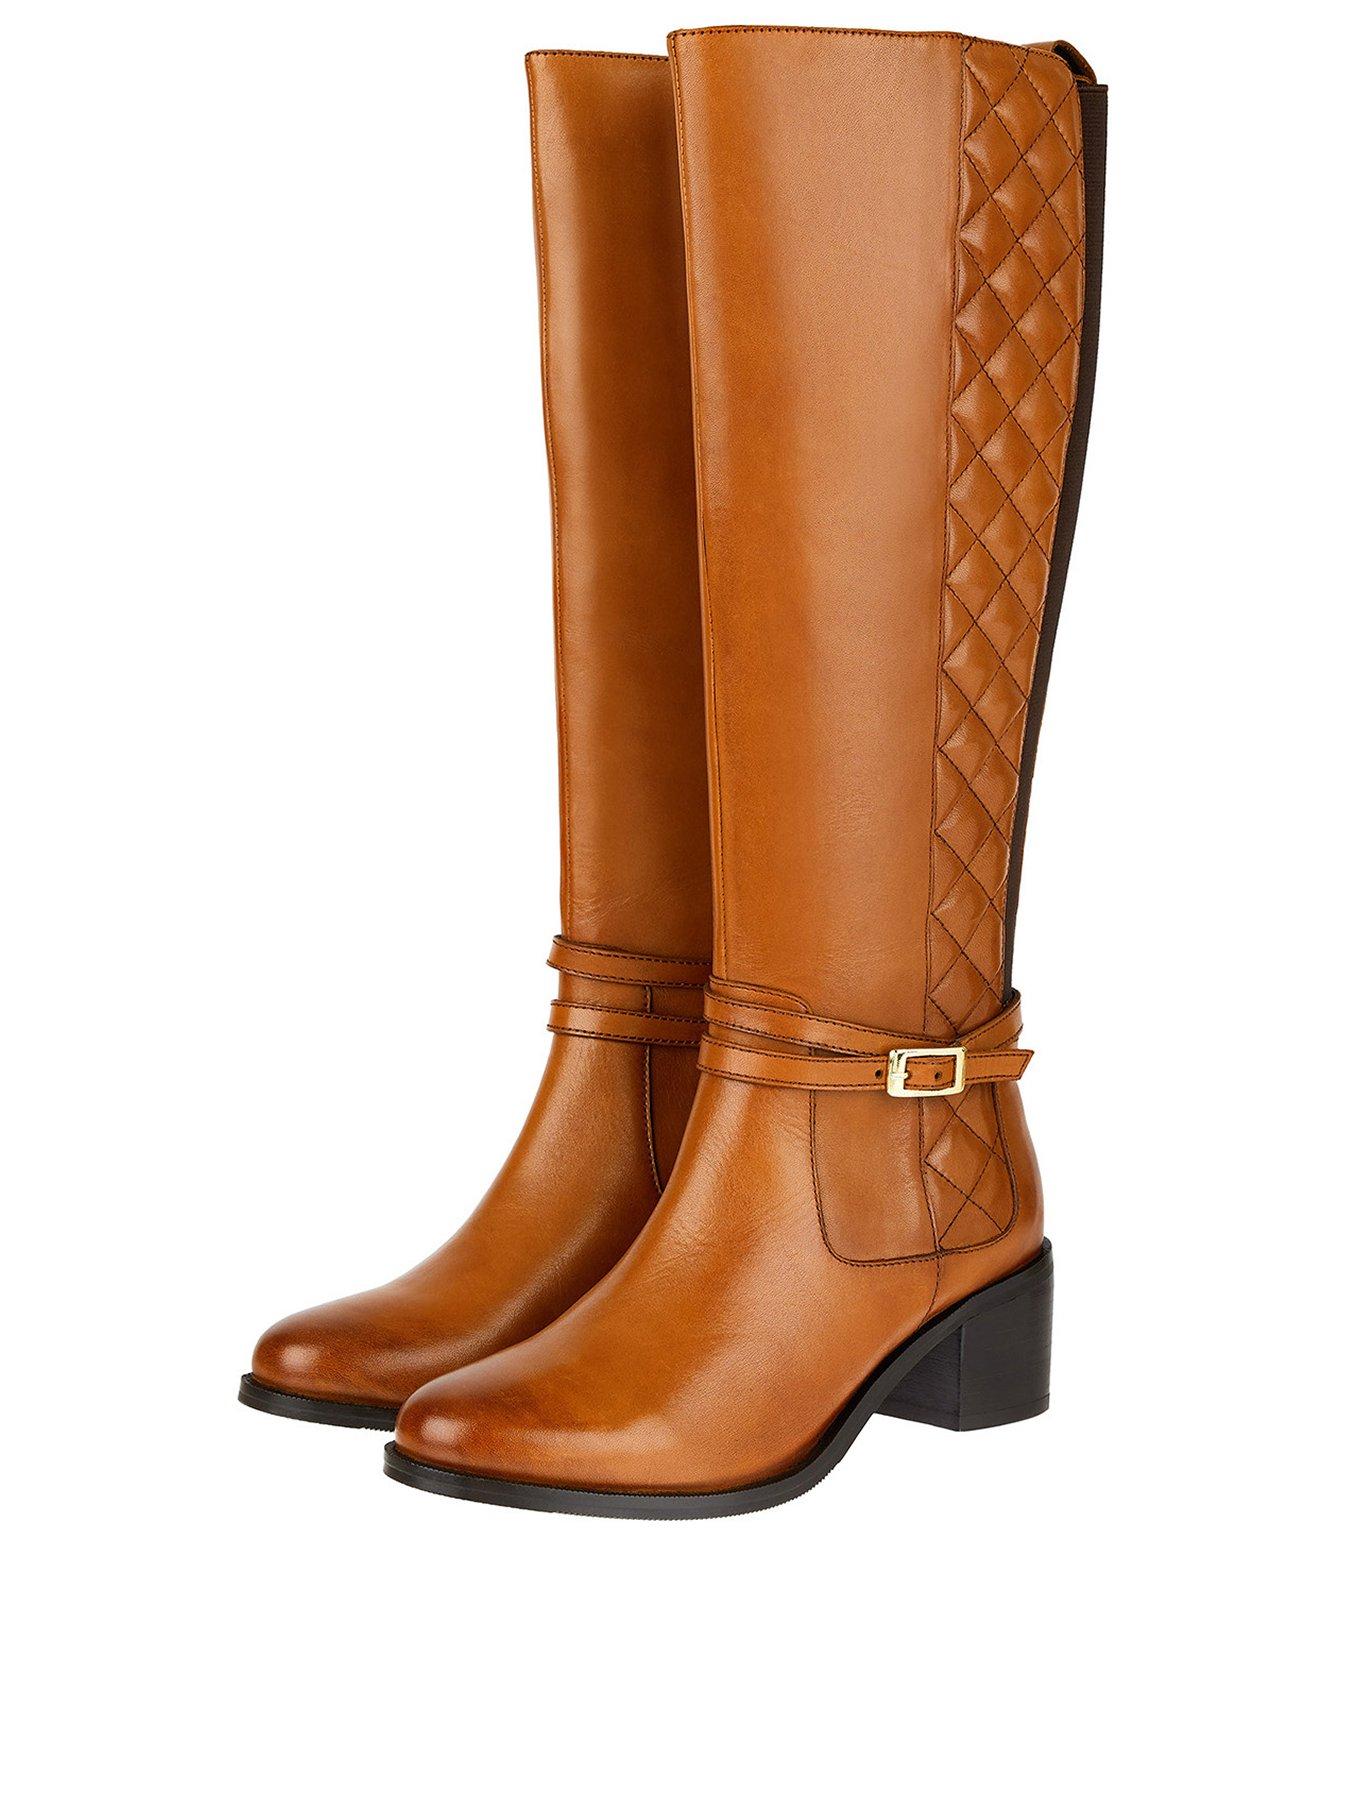 Monsoon Long Leather Riding Boots - Tan 